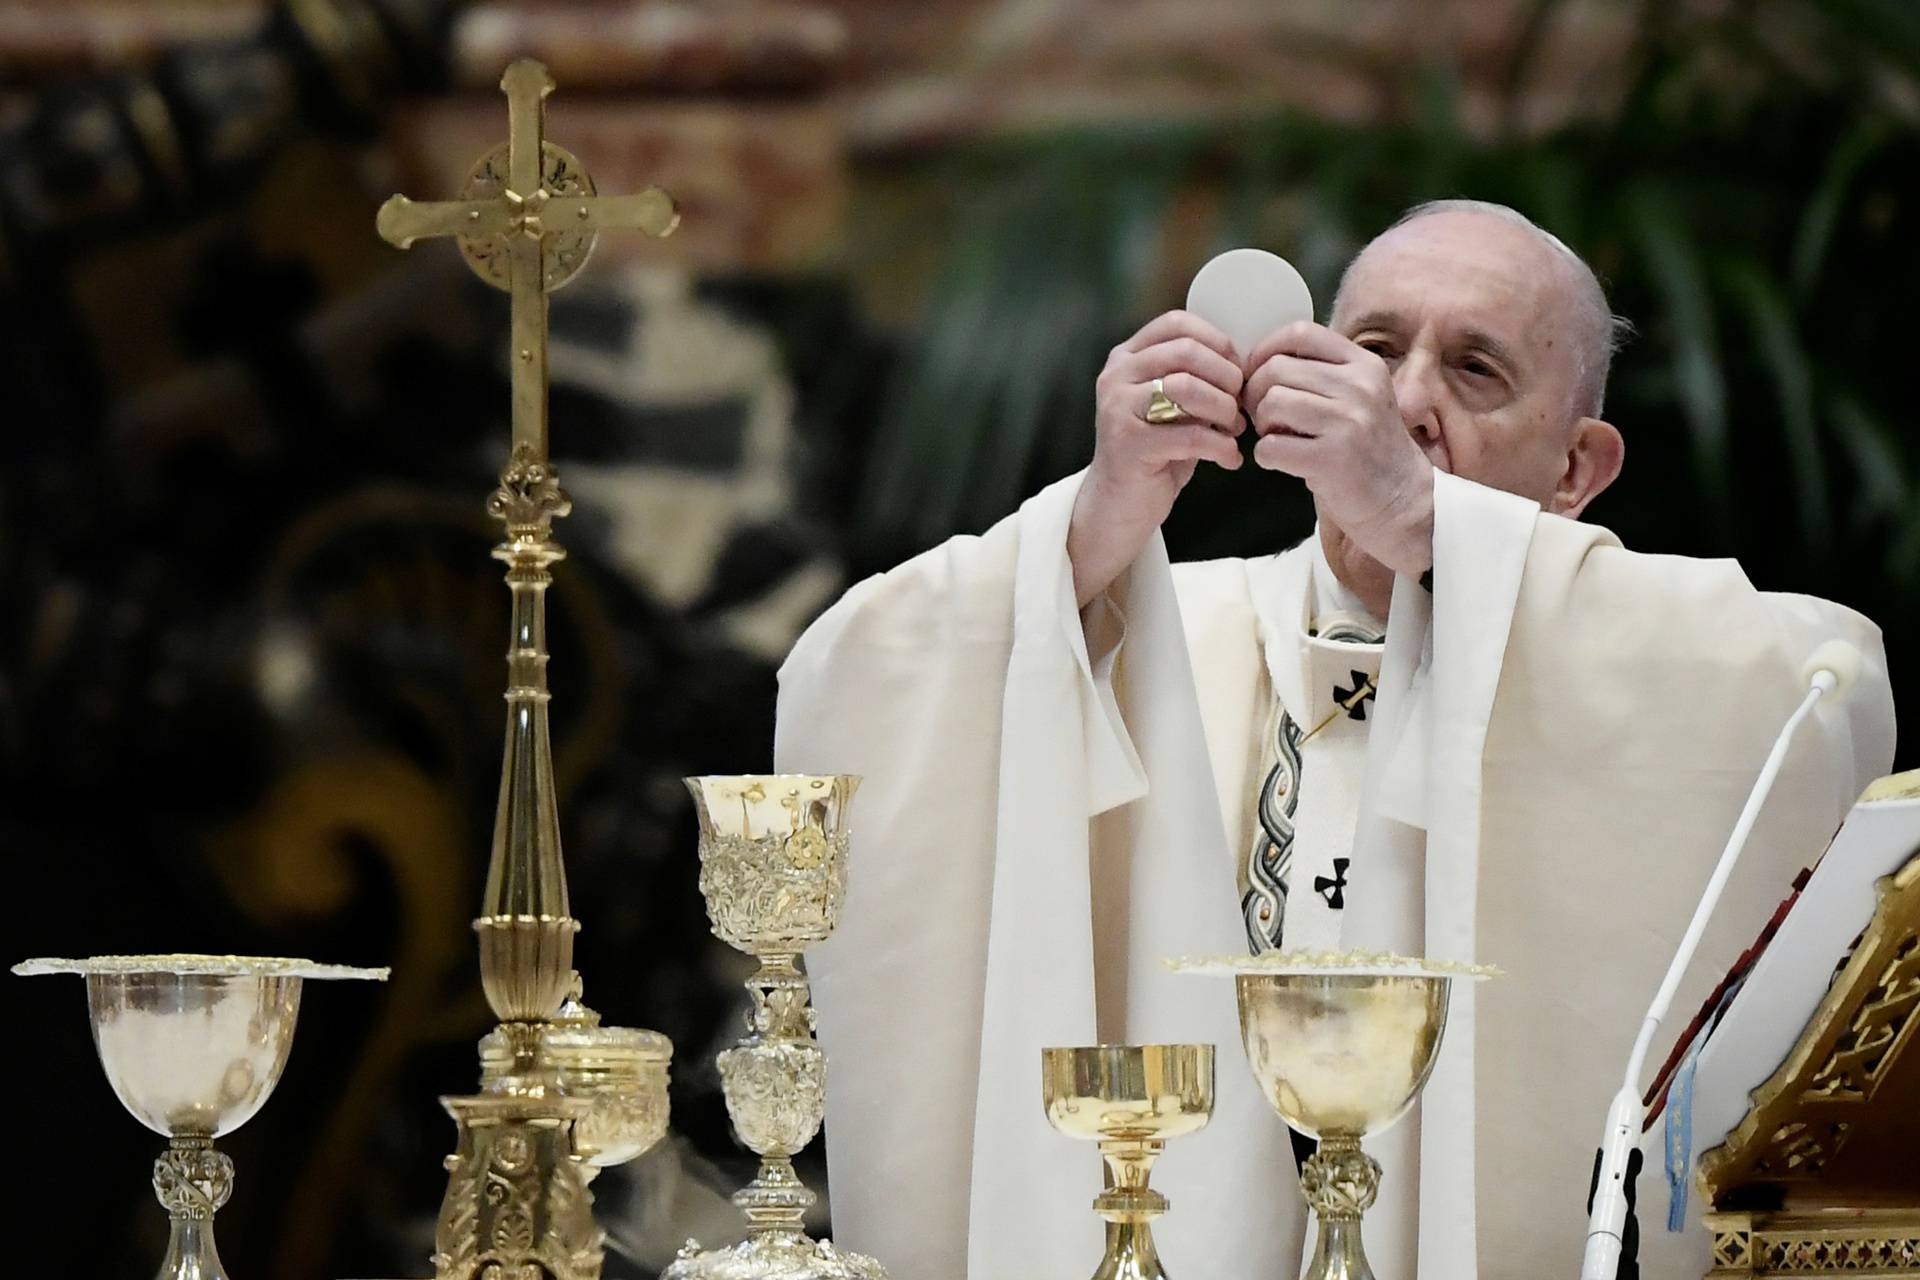 Pope Francis leads Easter Mass at the Vatican